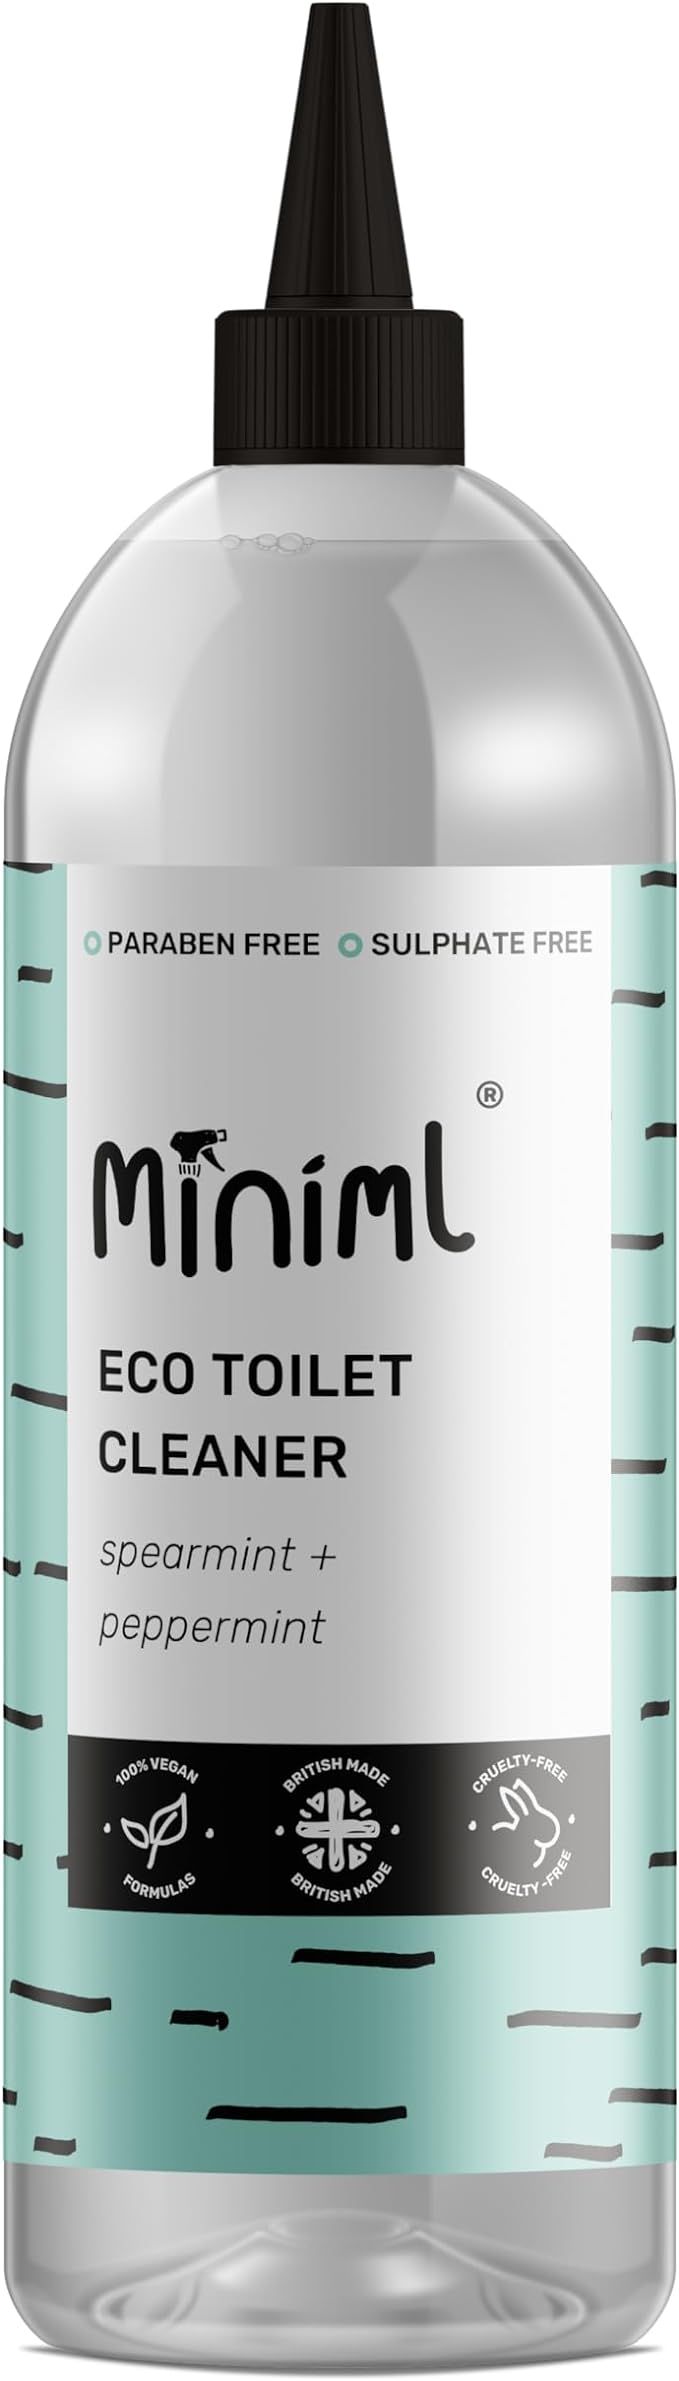 Miniml Eco Toilet Cleaner Spearmint & Peppermint 1L - All Natural Limescale Remover, Descaler and... | Amazon (UK)